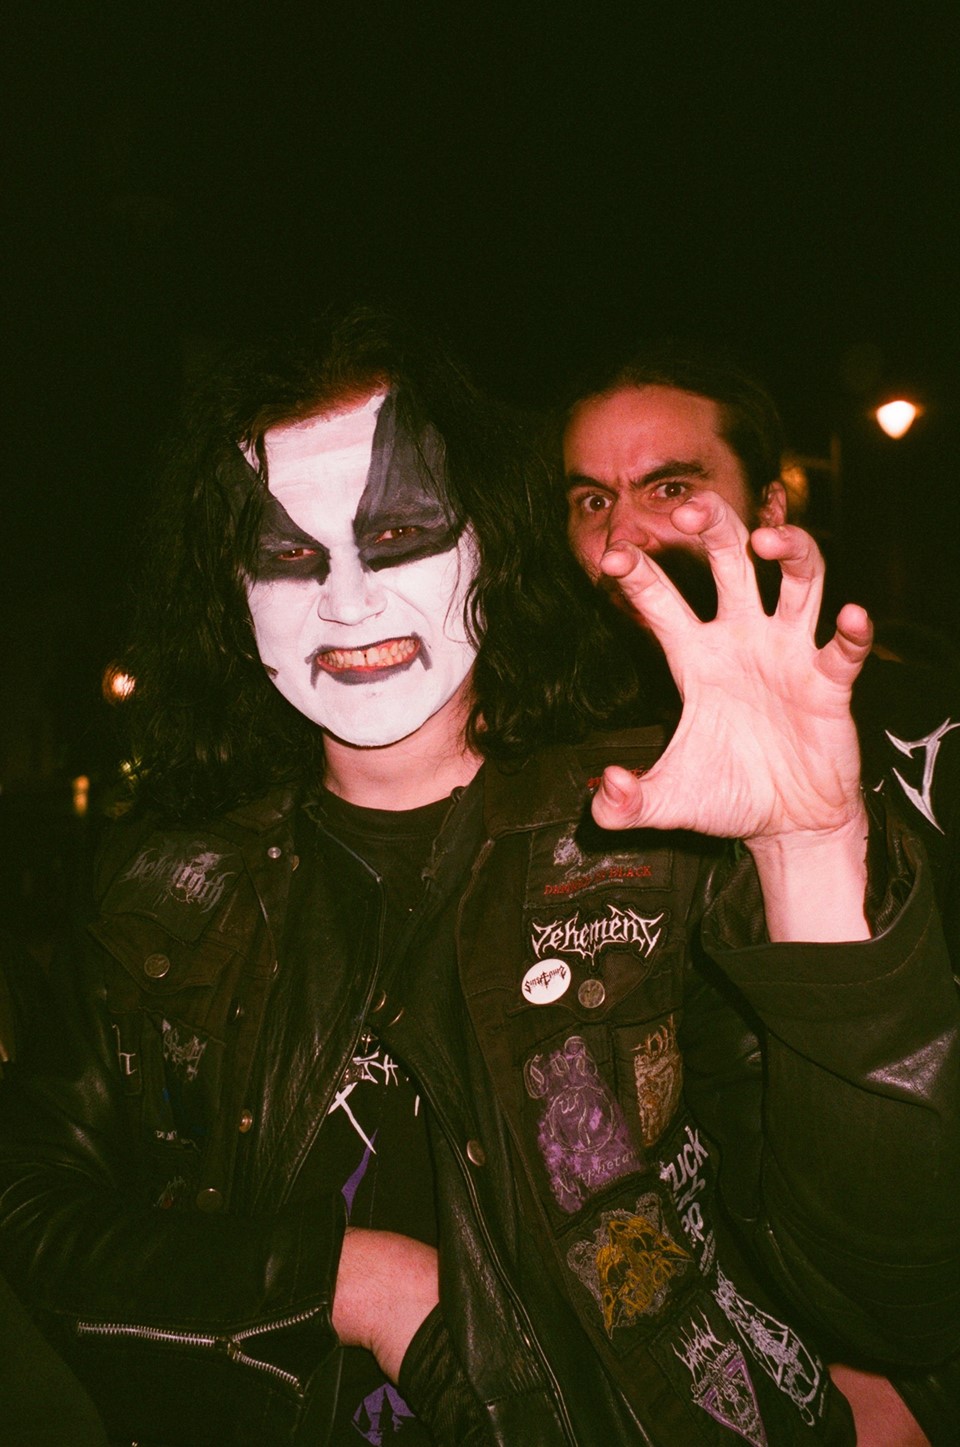 Capturing black metal fans in full 'corpse paint